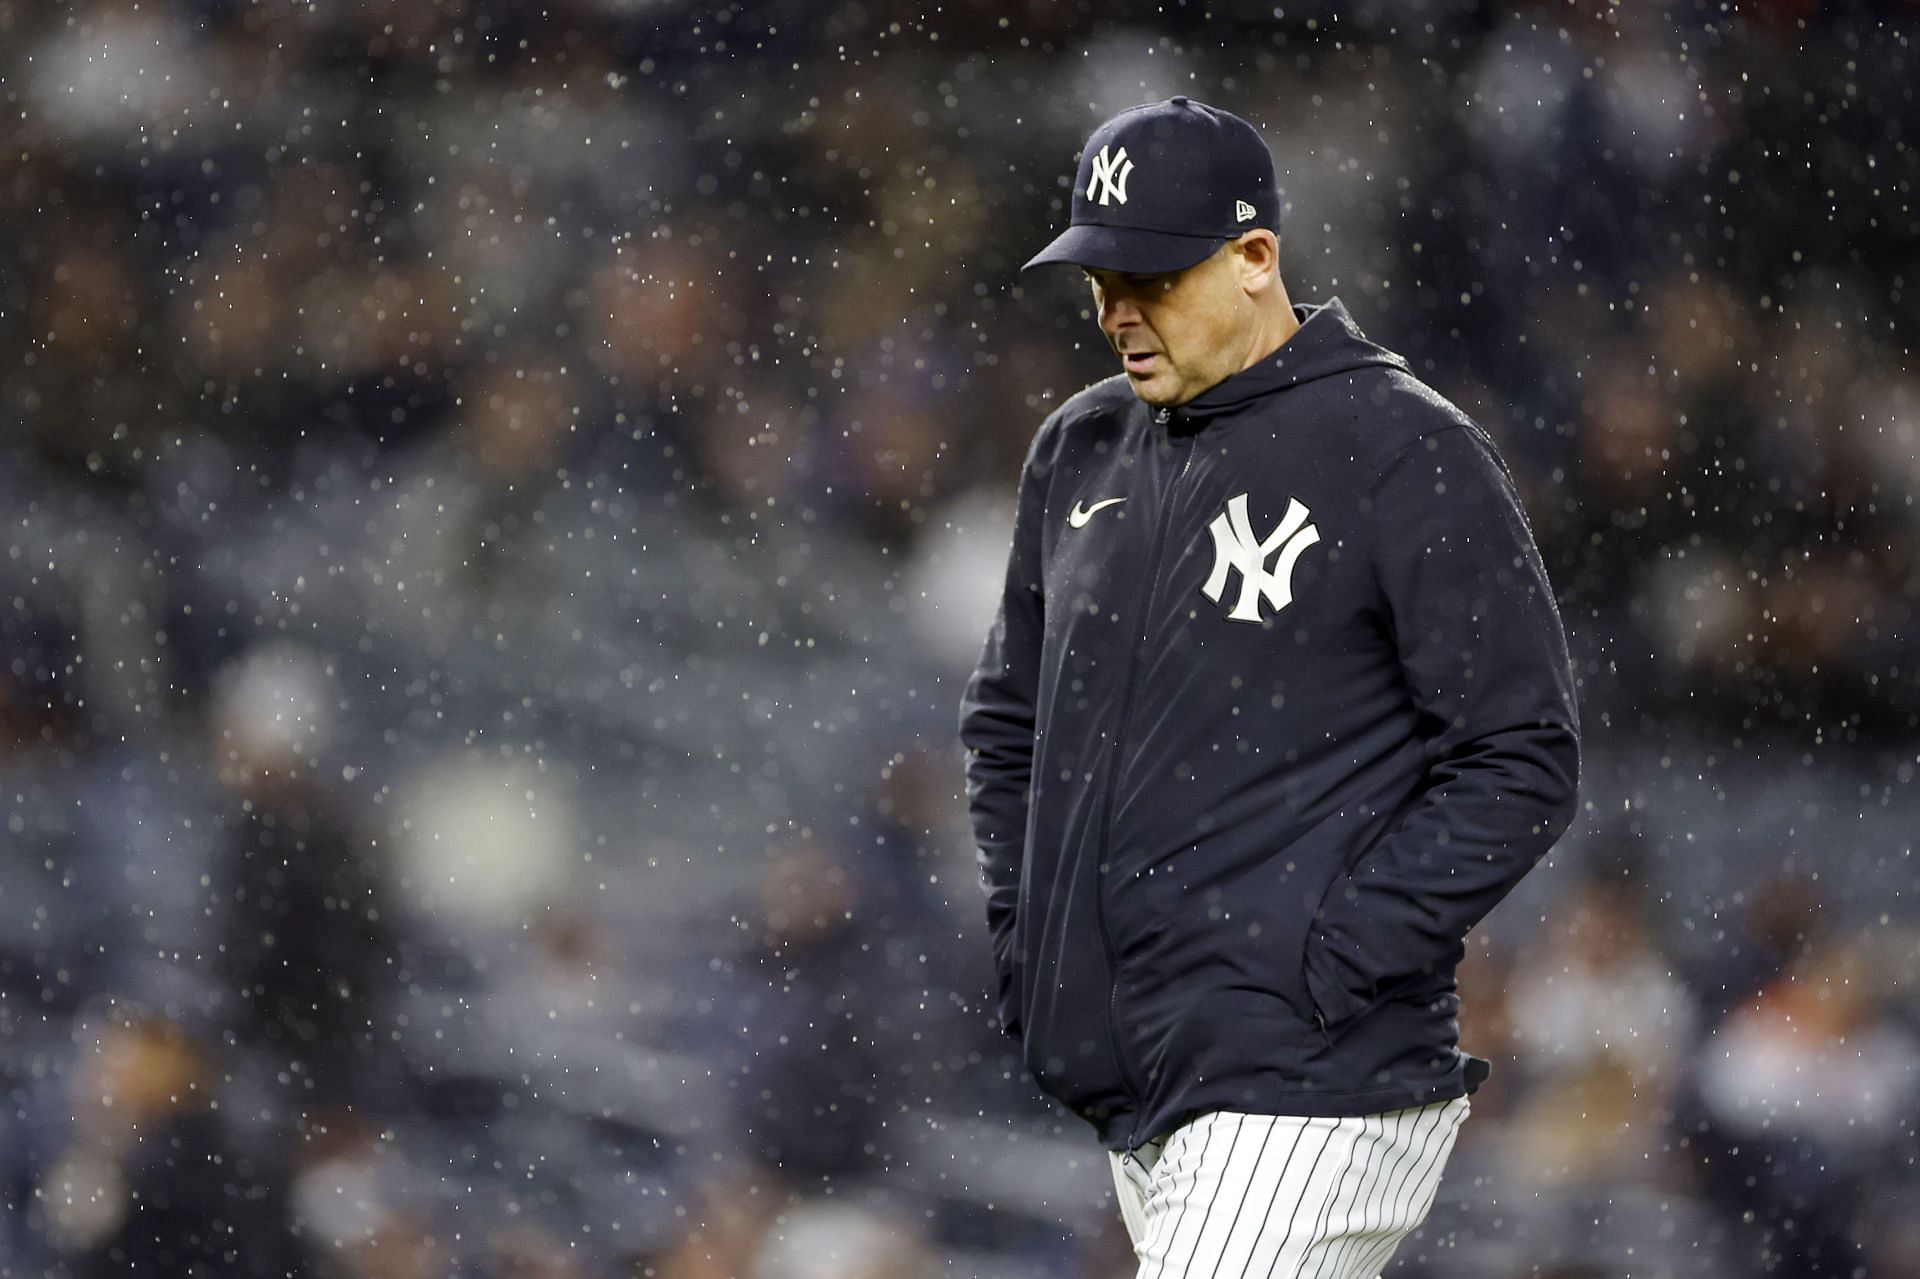 Aaron Boone expressed his desire to not get ejected from games.